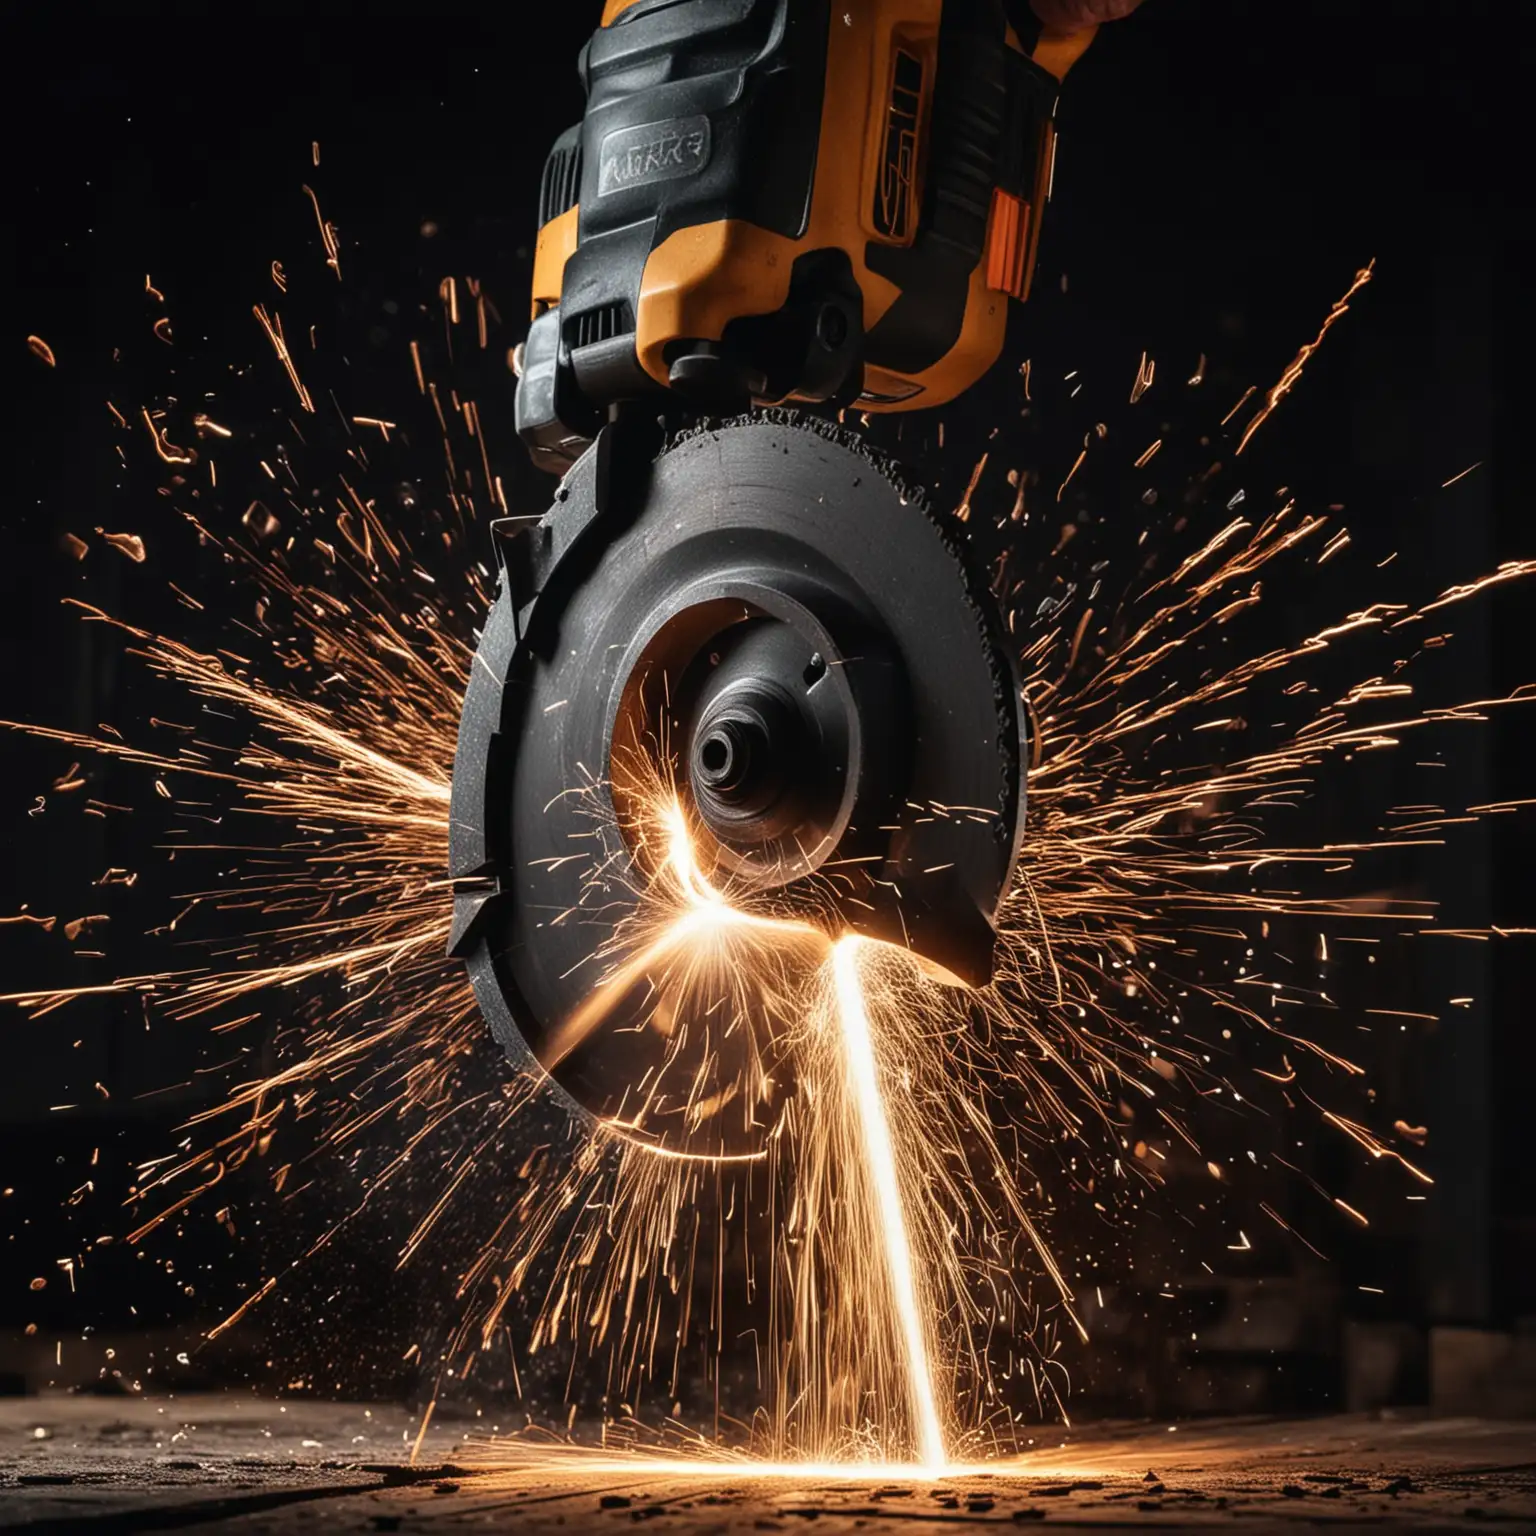 photo of a power tool blade cutting with sparks flying, dark theme, cool illumination 